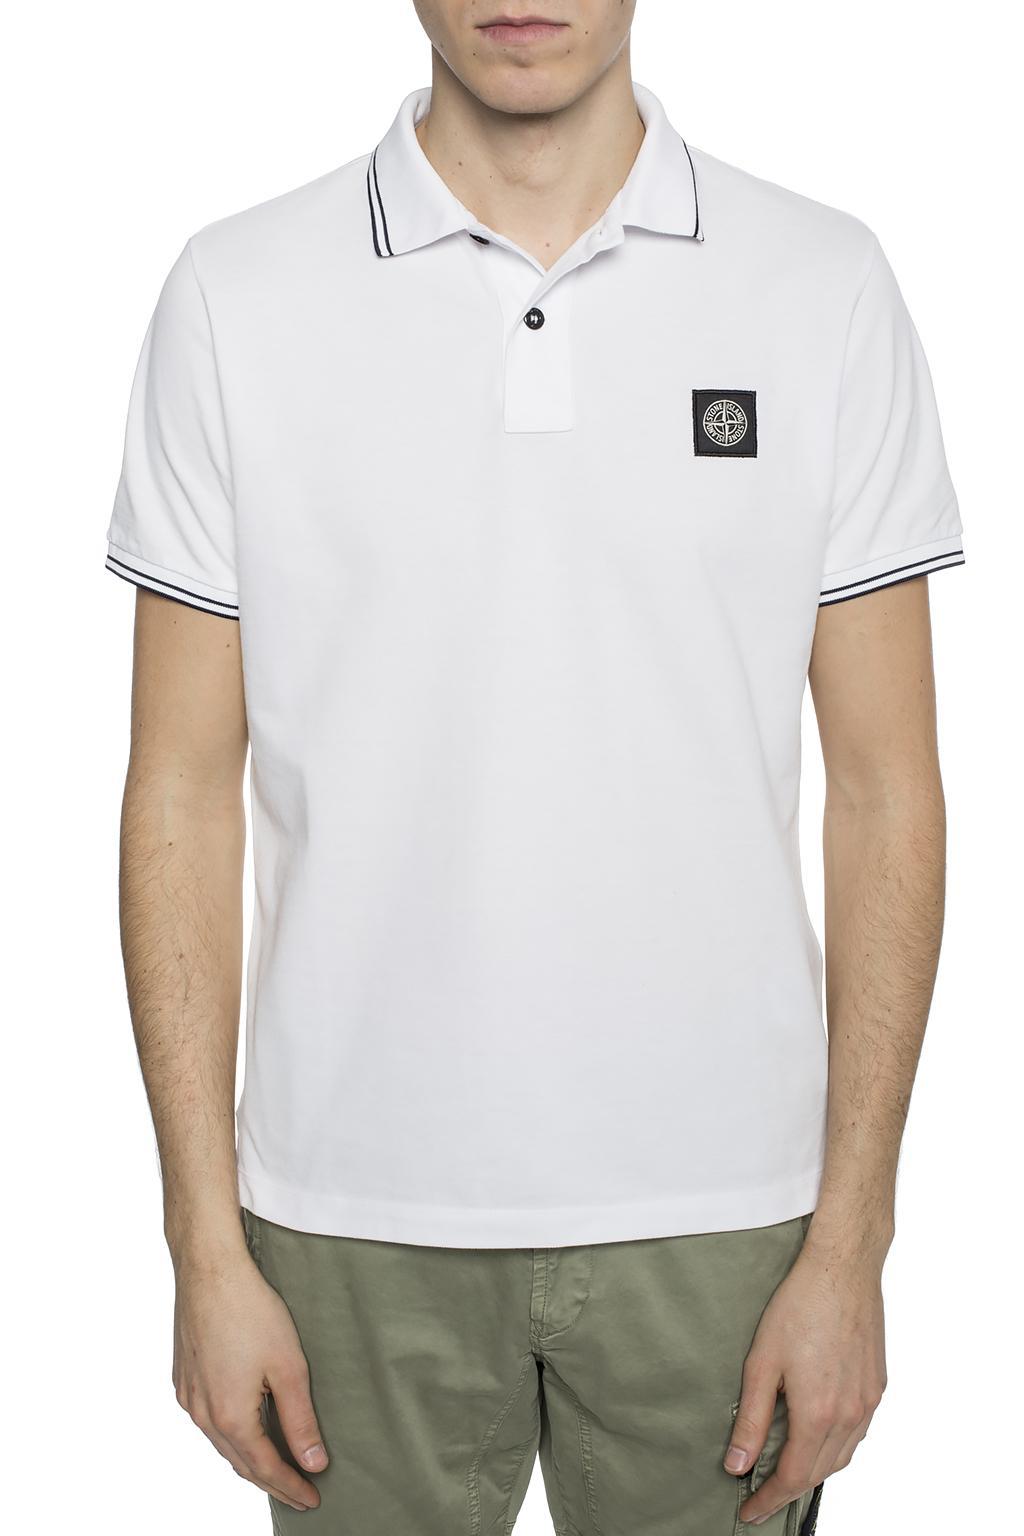 Stone Island Patched Polo Shirt in White for Men - Lyst